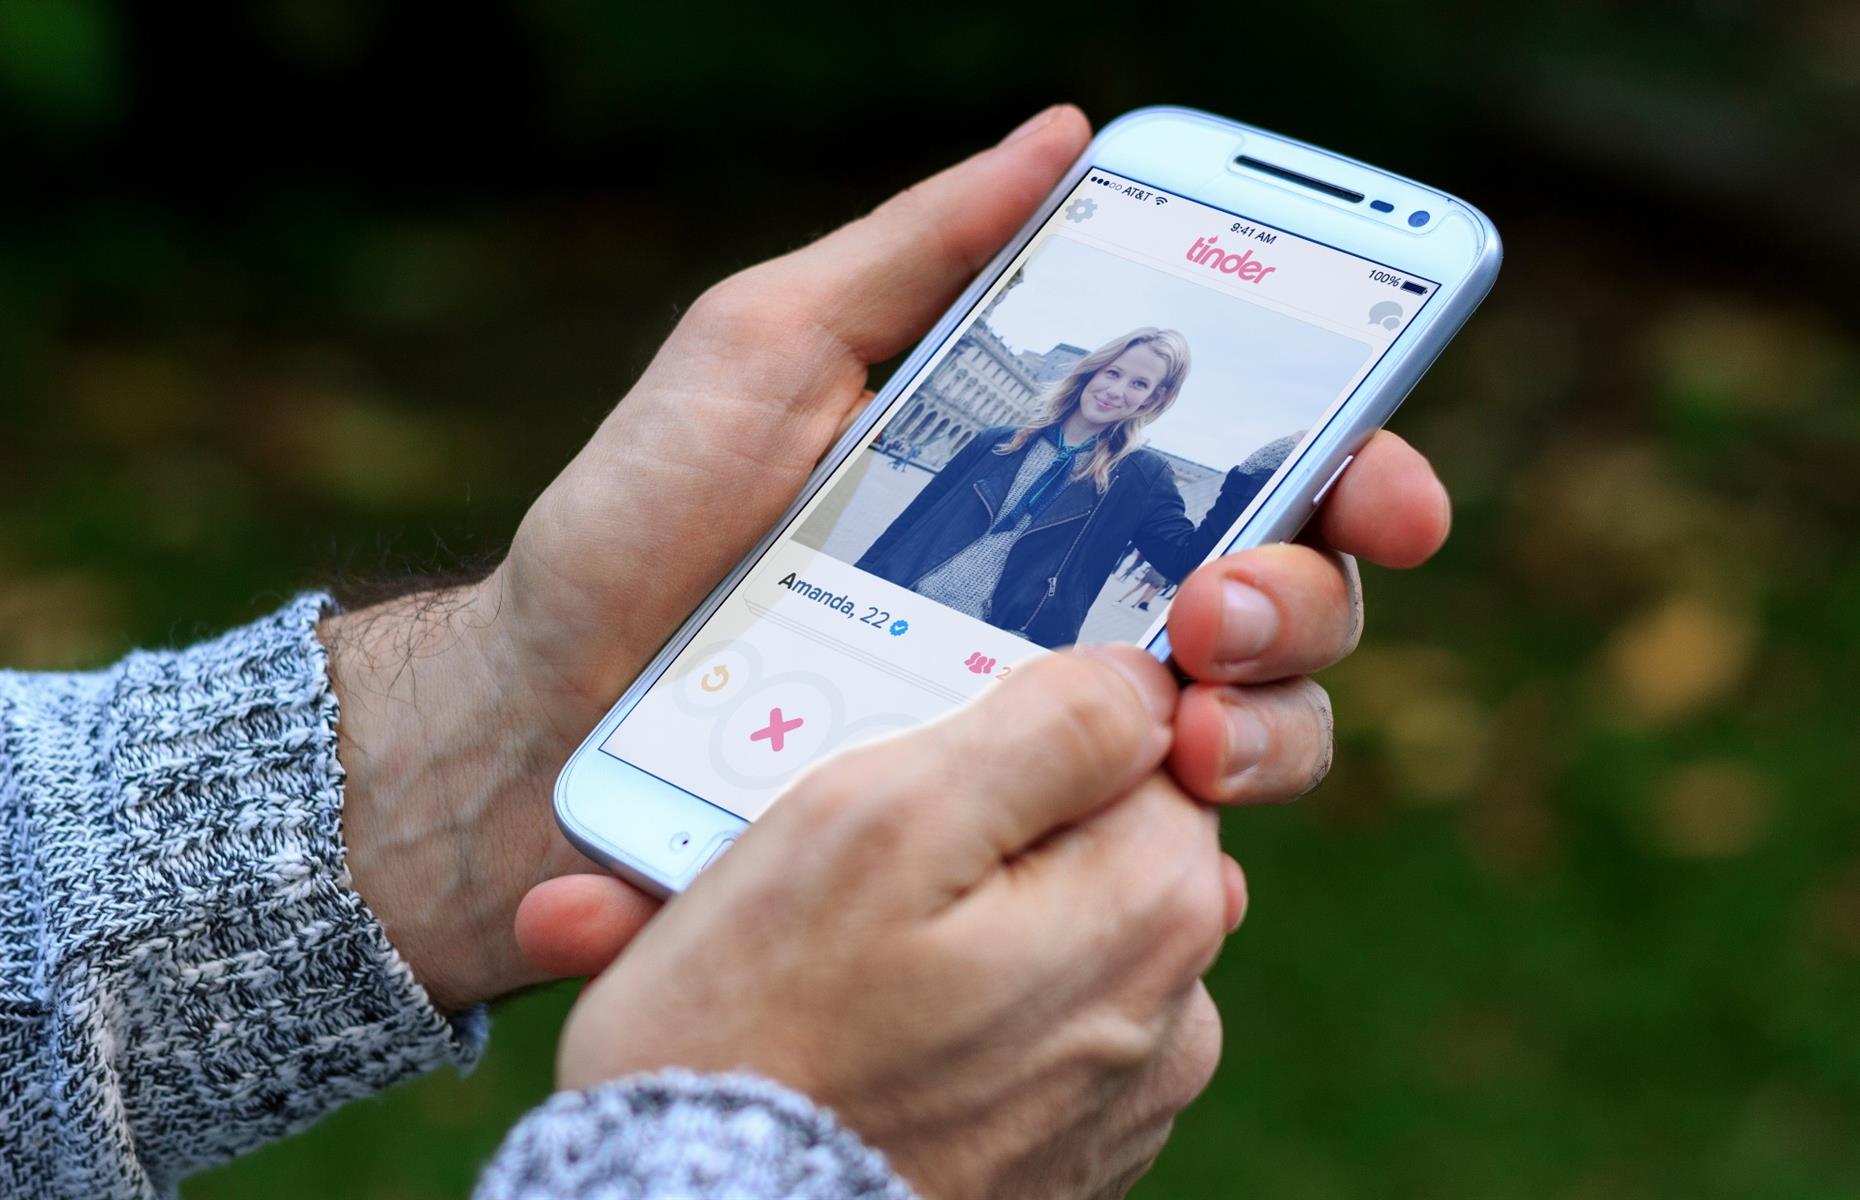 Dating apps are introducing virtual date features